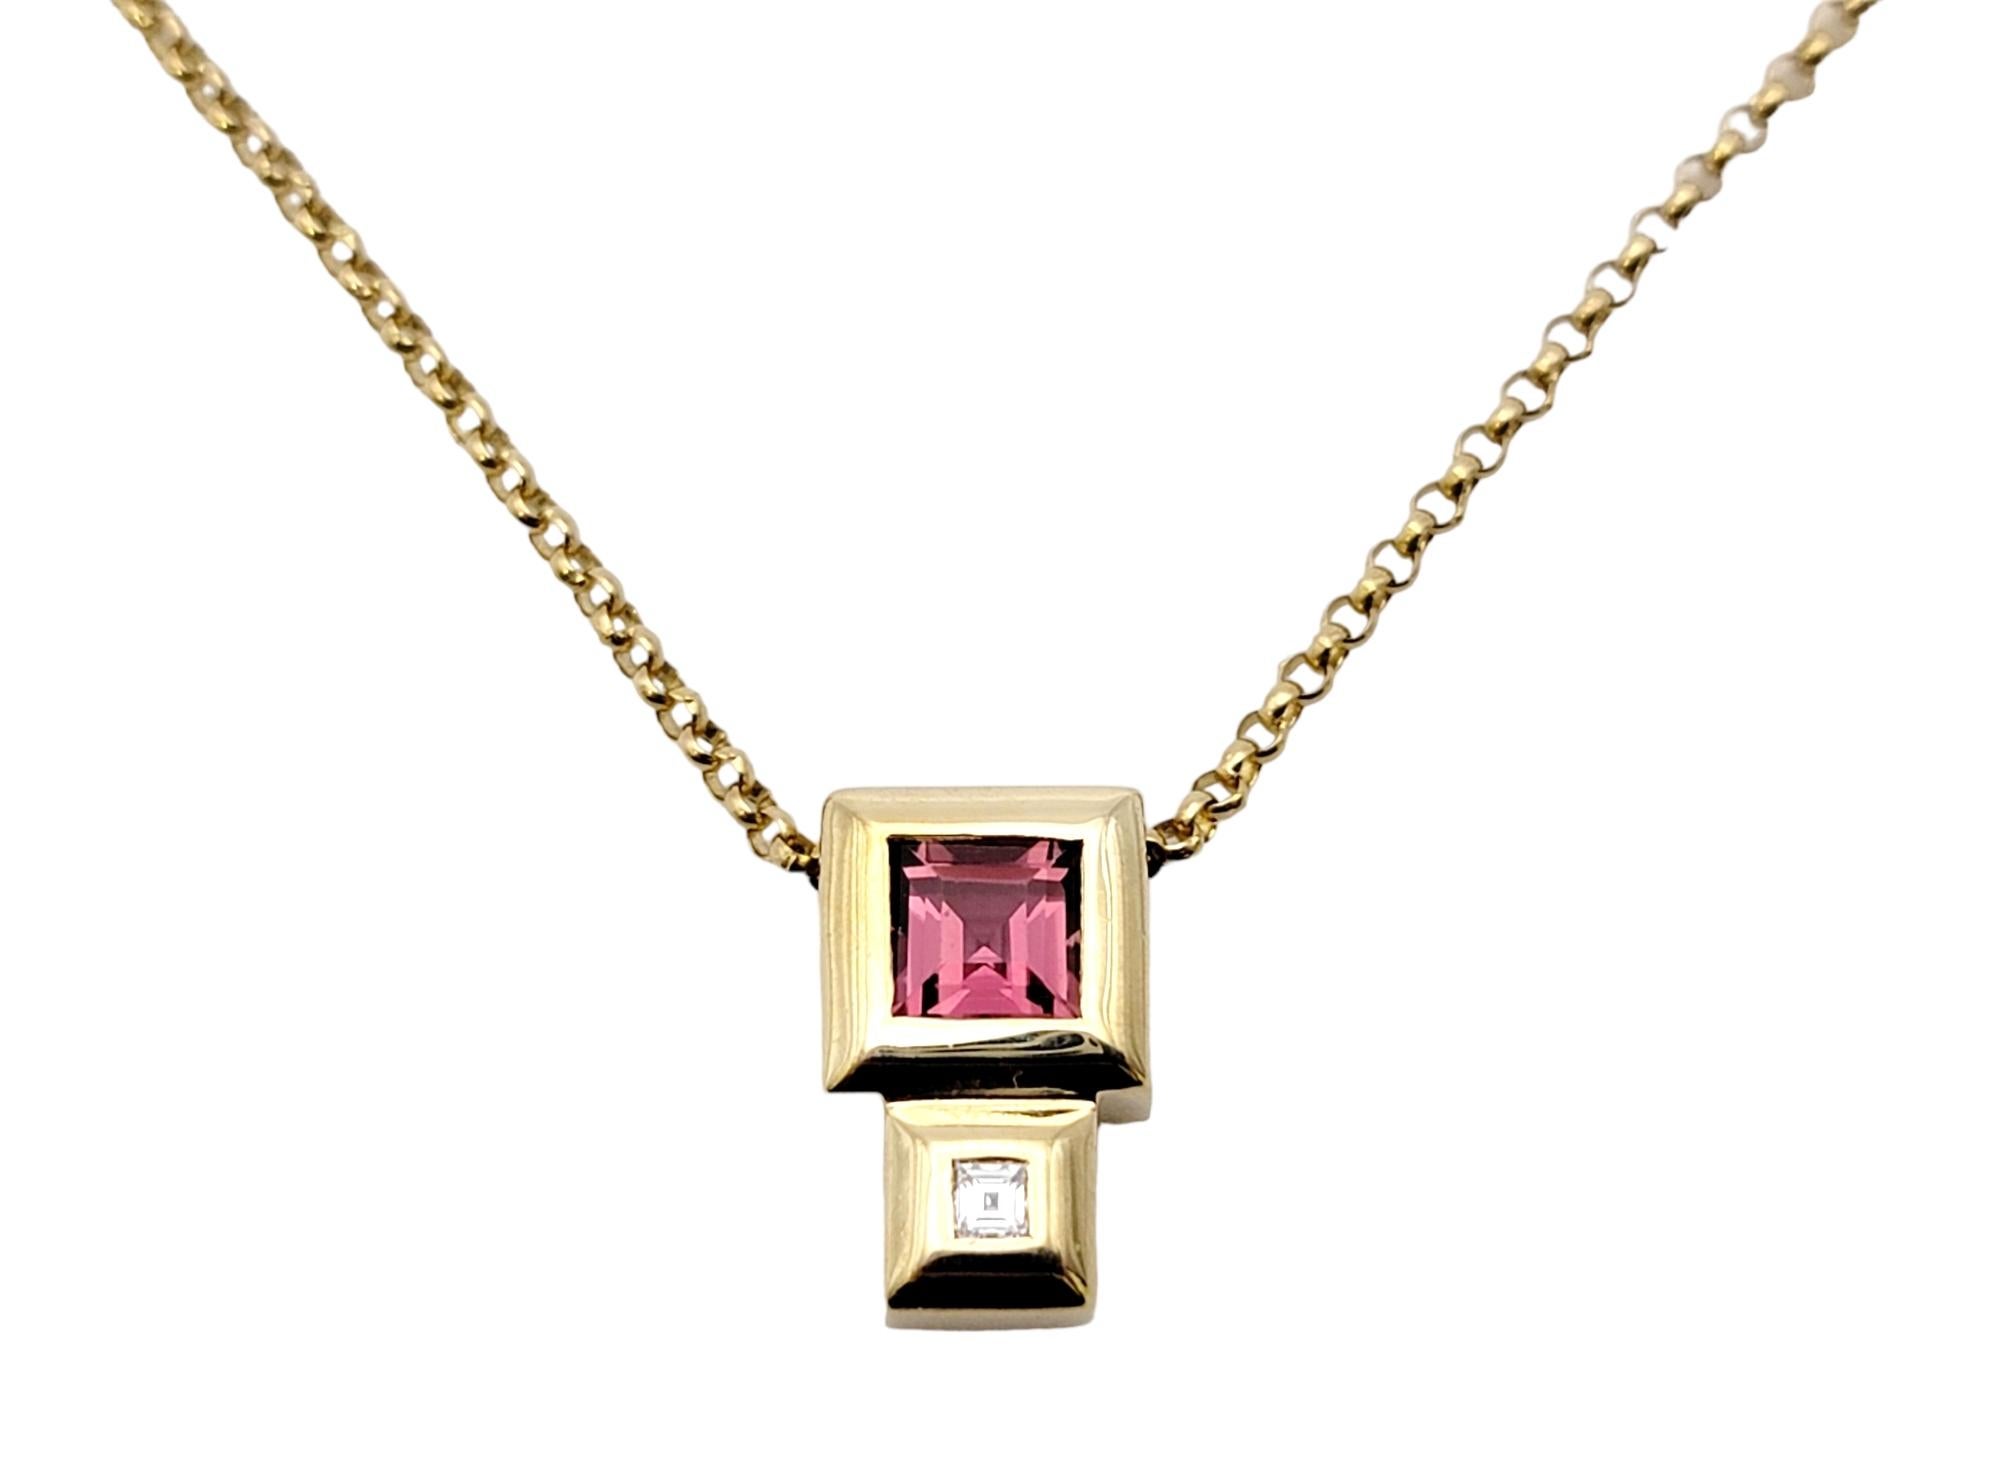 Contemporary Square Cut Pink Tourmaline and Diamond Yellow Gold Pendant Necklace In Excellent Condition For Sale In Scottsdale, AZ